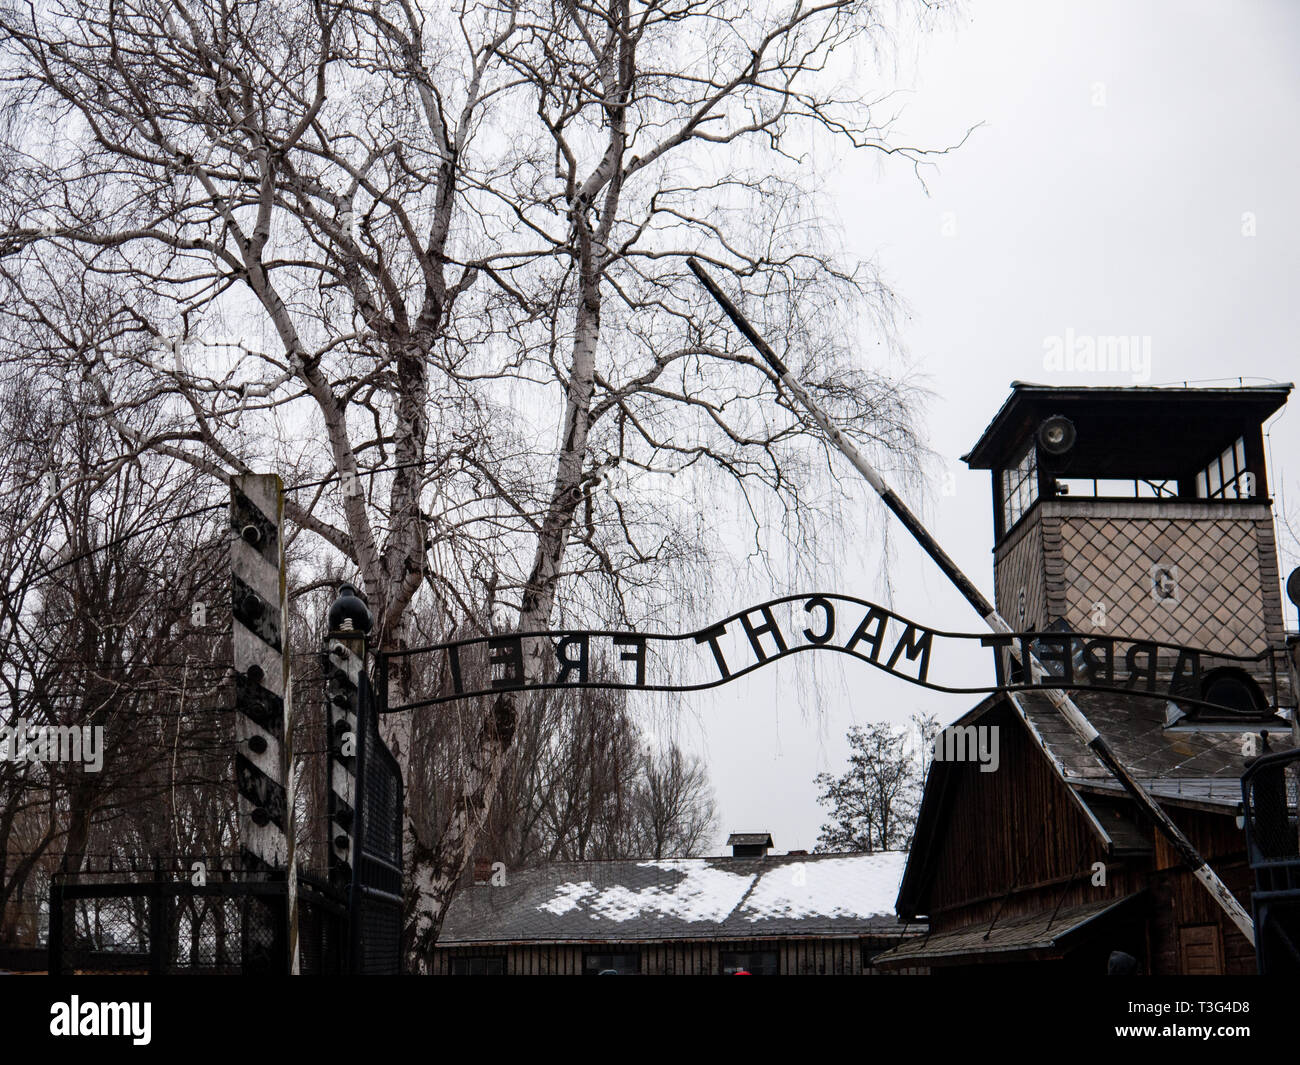 Arbeit Macht Frei sign at the entrance to Auschwitz concentration camp and death camp, Poland Stock Photo